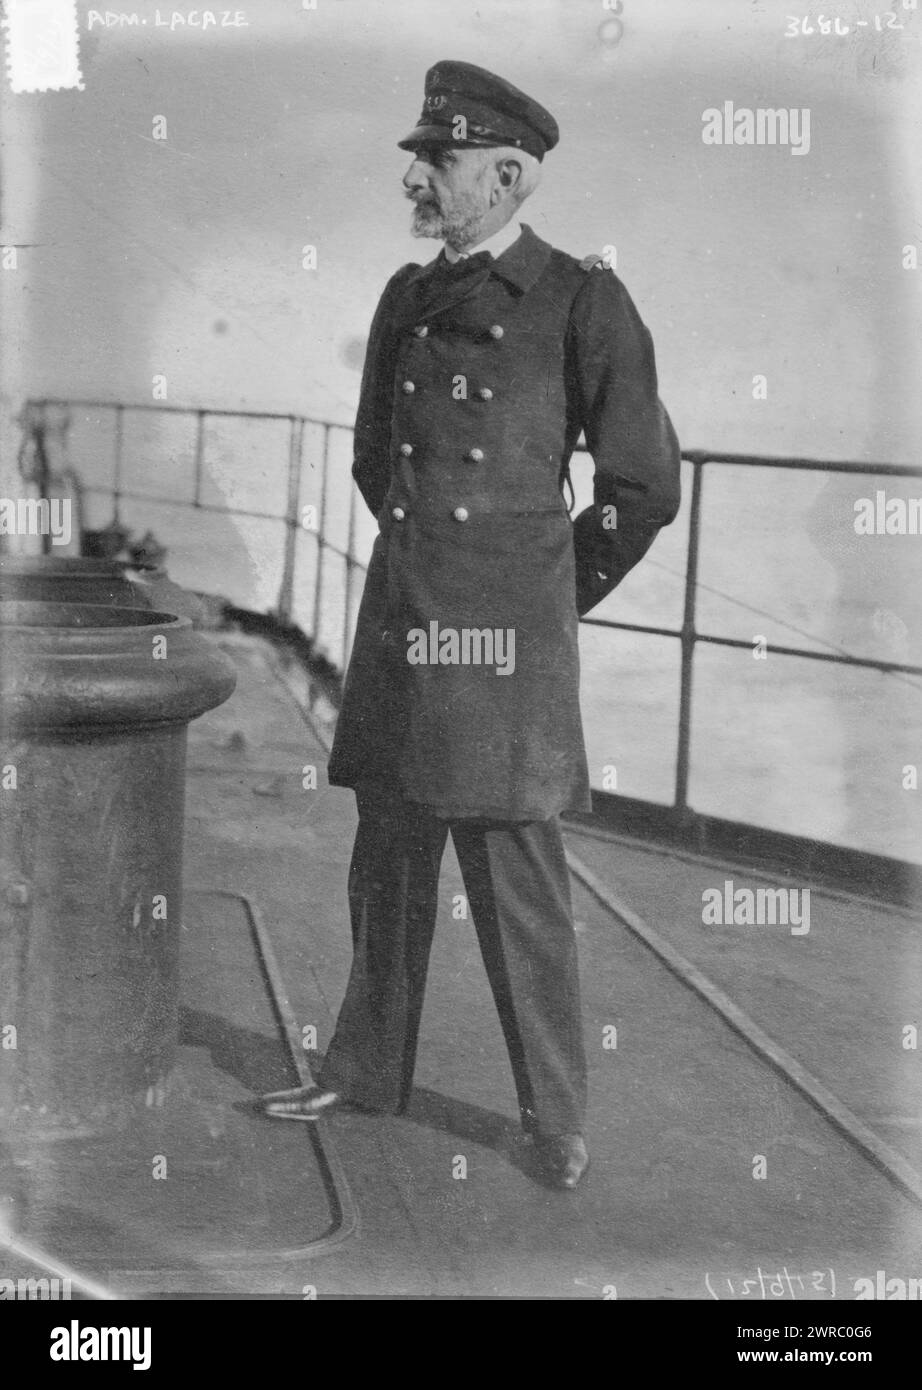 Adm. Lacaze, Photograph shows Marie Jean Lucien Lacaze (1860-1955), a French admiral who served in the Dardanelles Campaign during World War I., 1915 Dec. 9, Glass negatives, 1 negative: glass Stock Photo